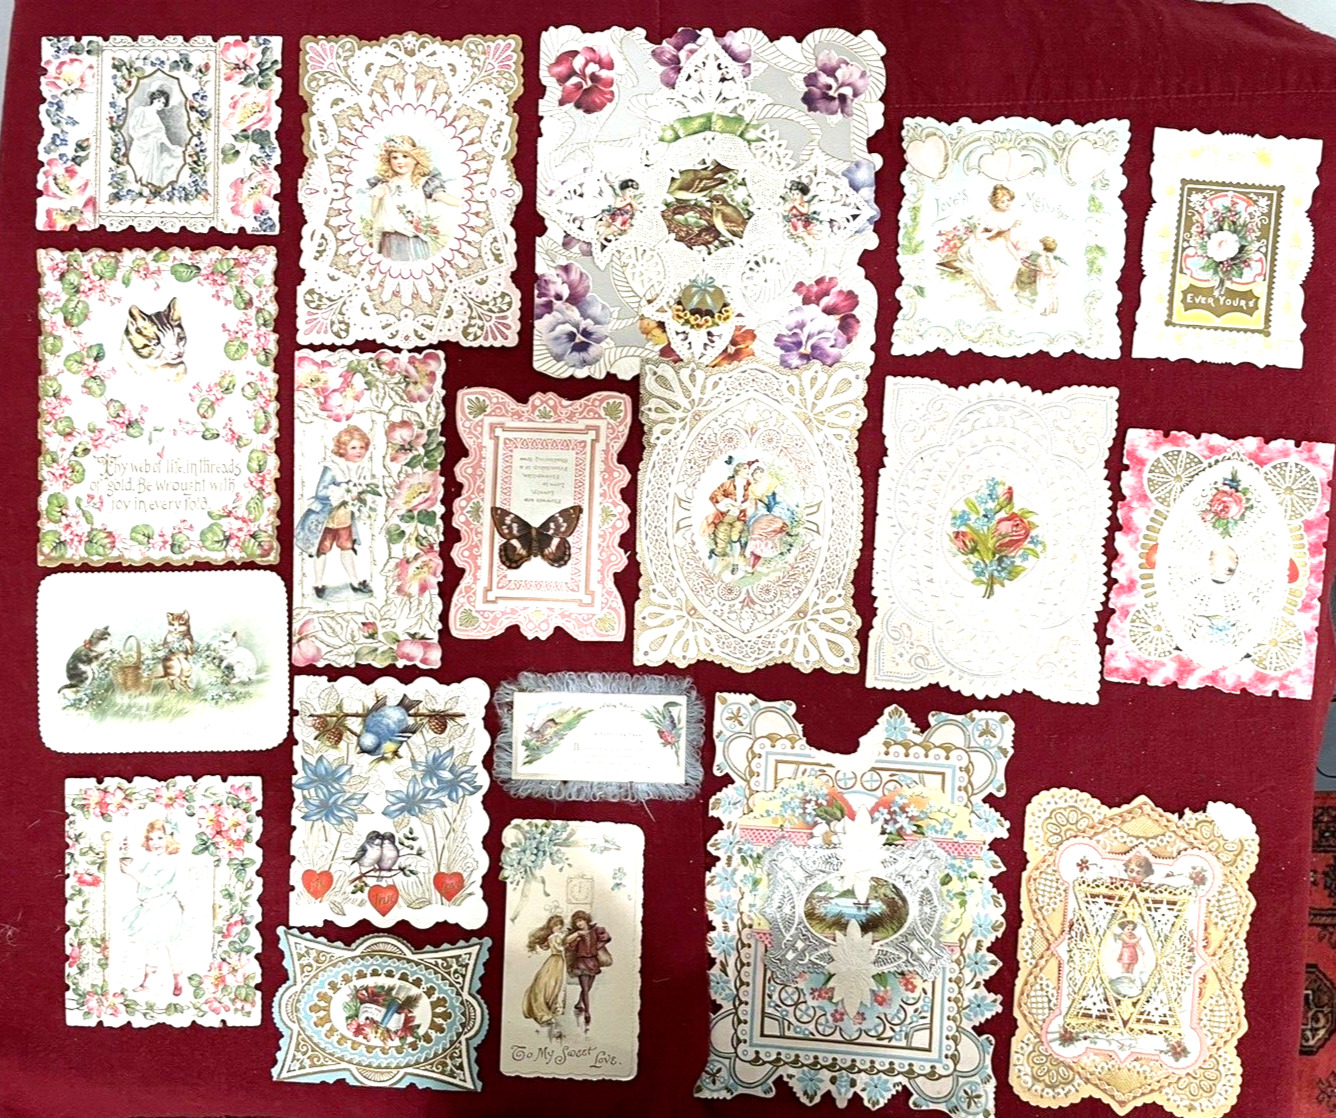 Lot of 19 Antique Early 1900s Die Cut Paper Lace Embossed Valentine Cards #2